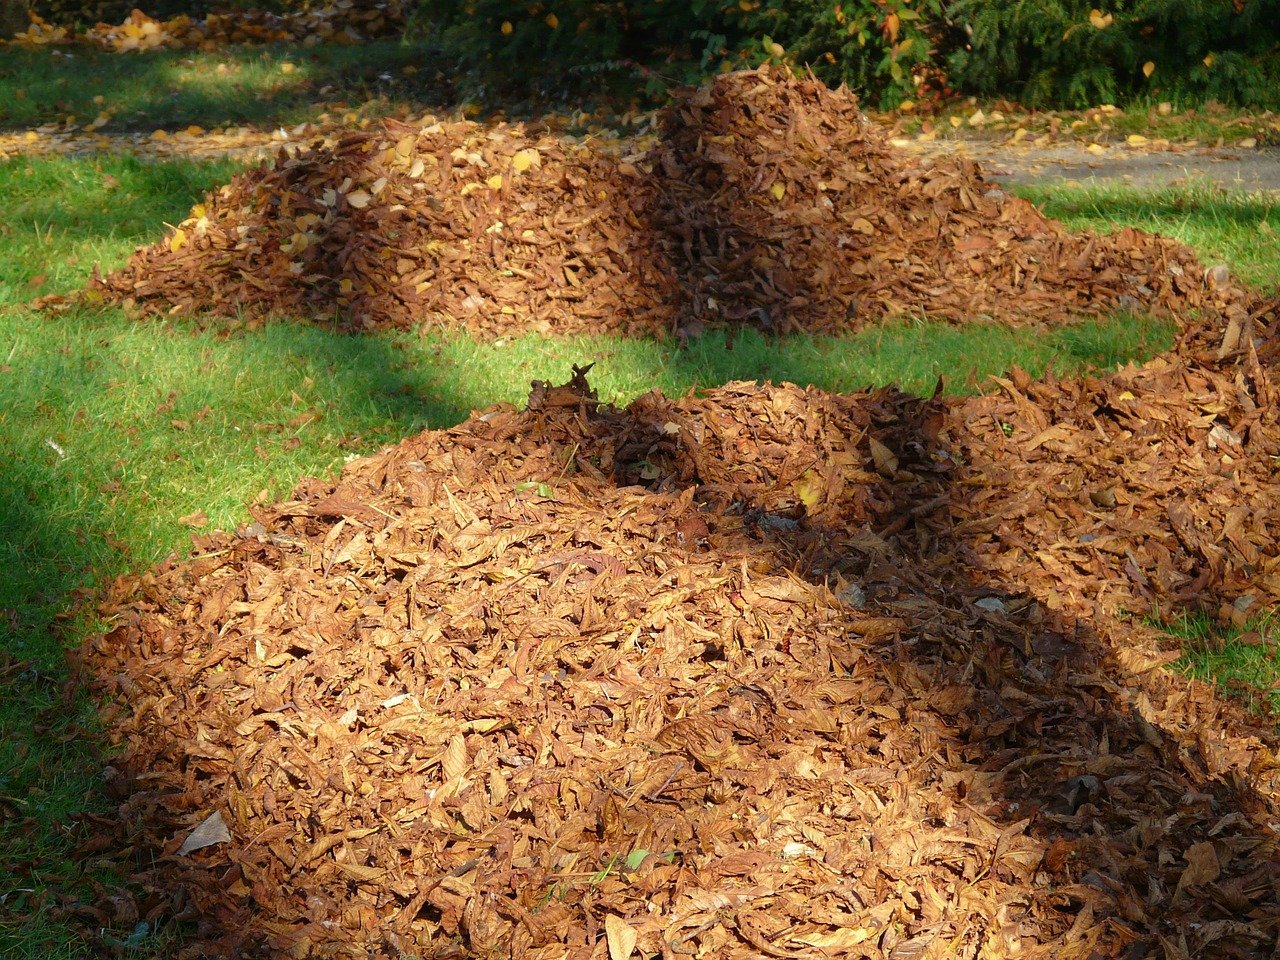 Compost heap made from leaves